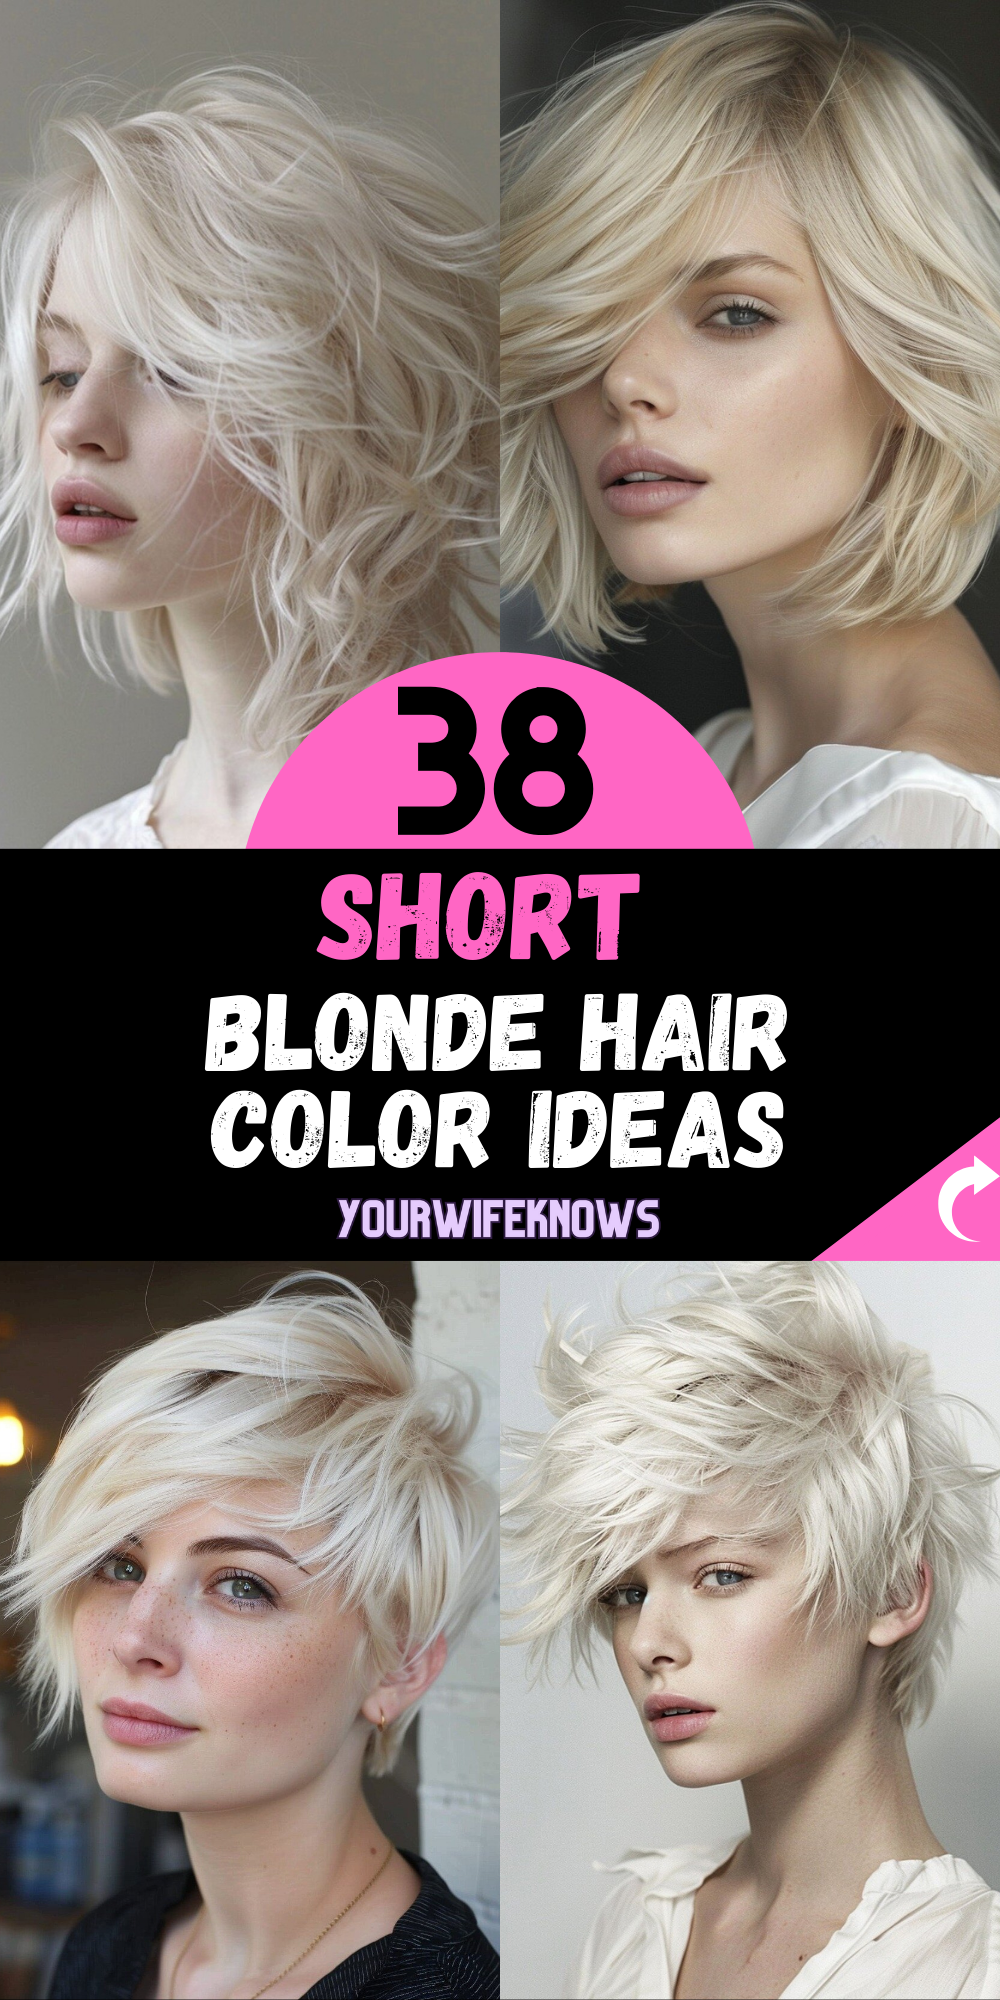 38 Captivating Blonde Hair Color Ideas for Short Hair